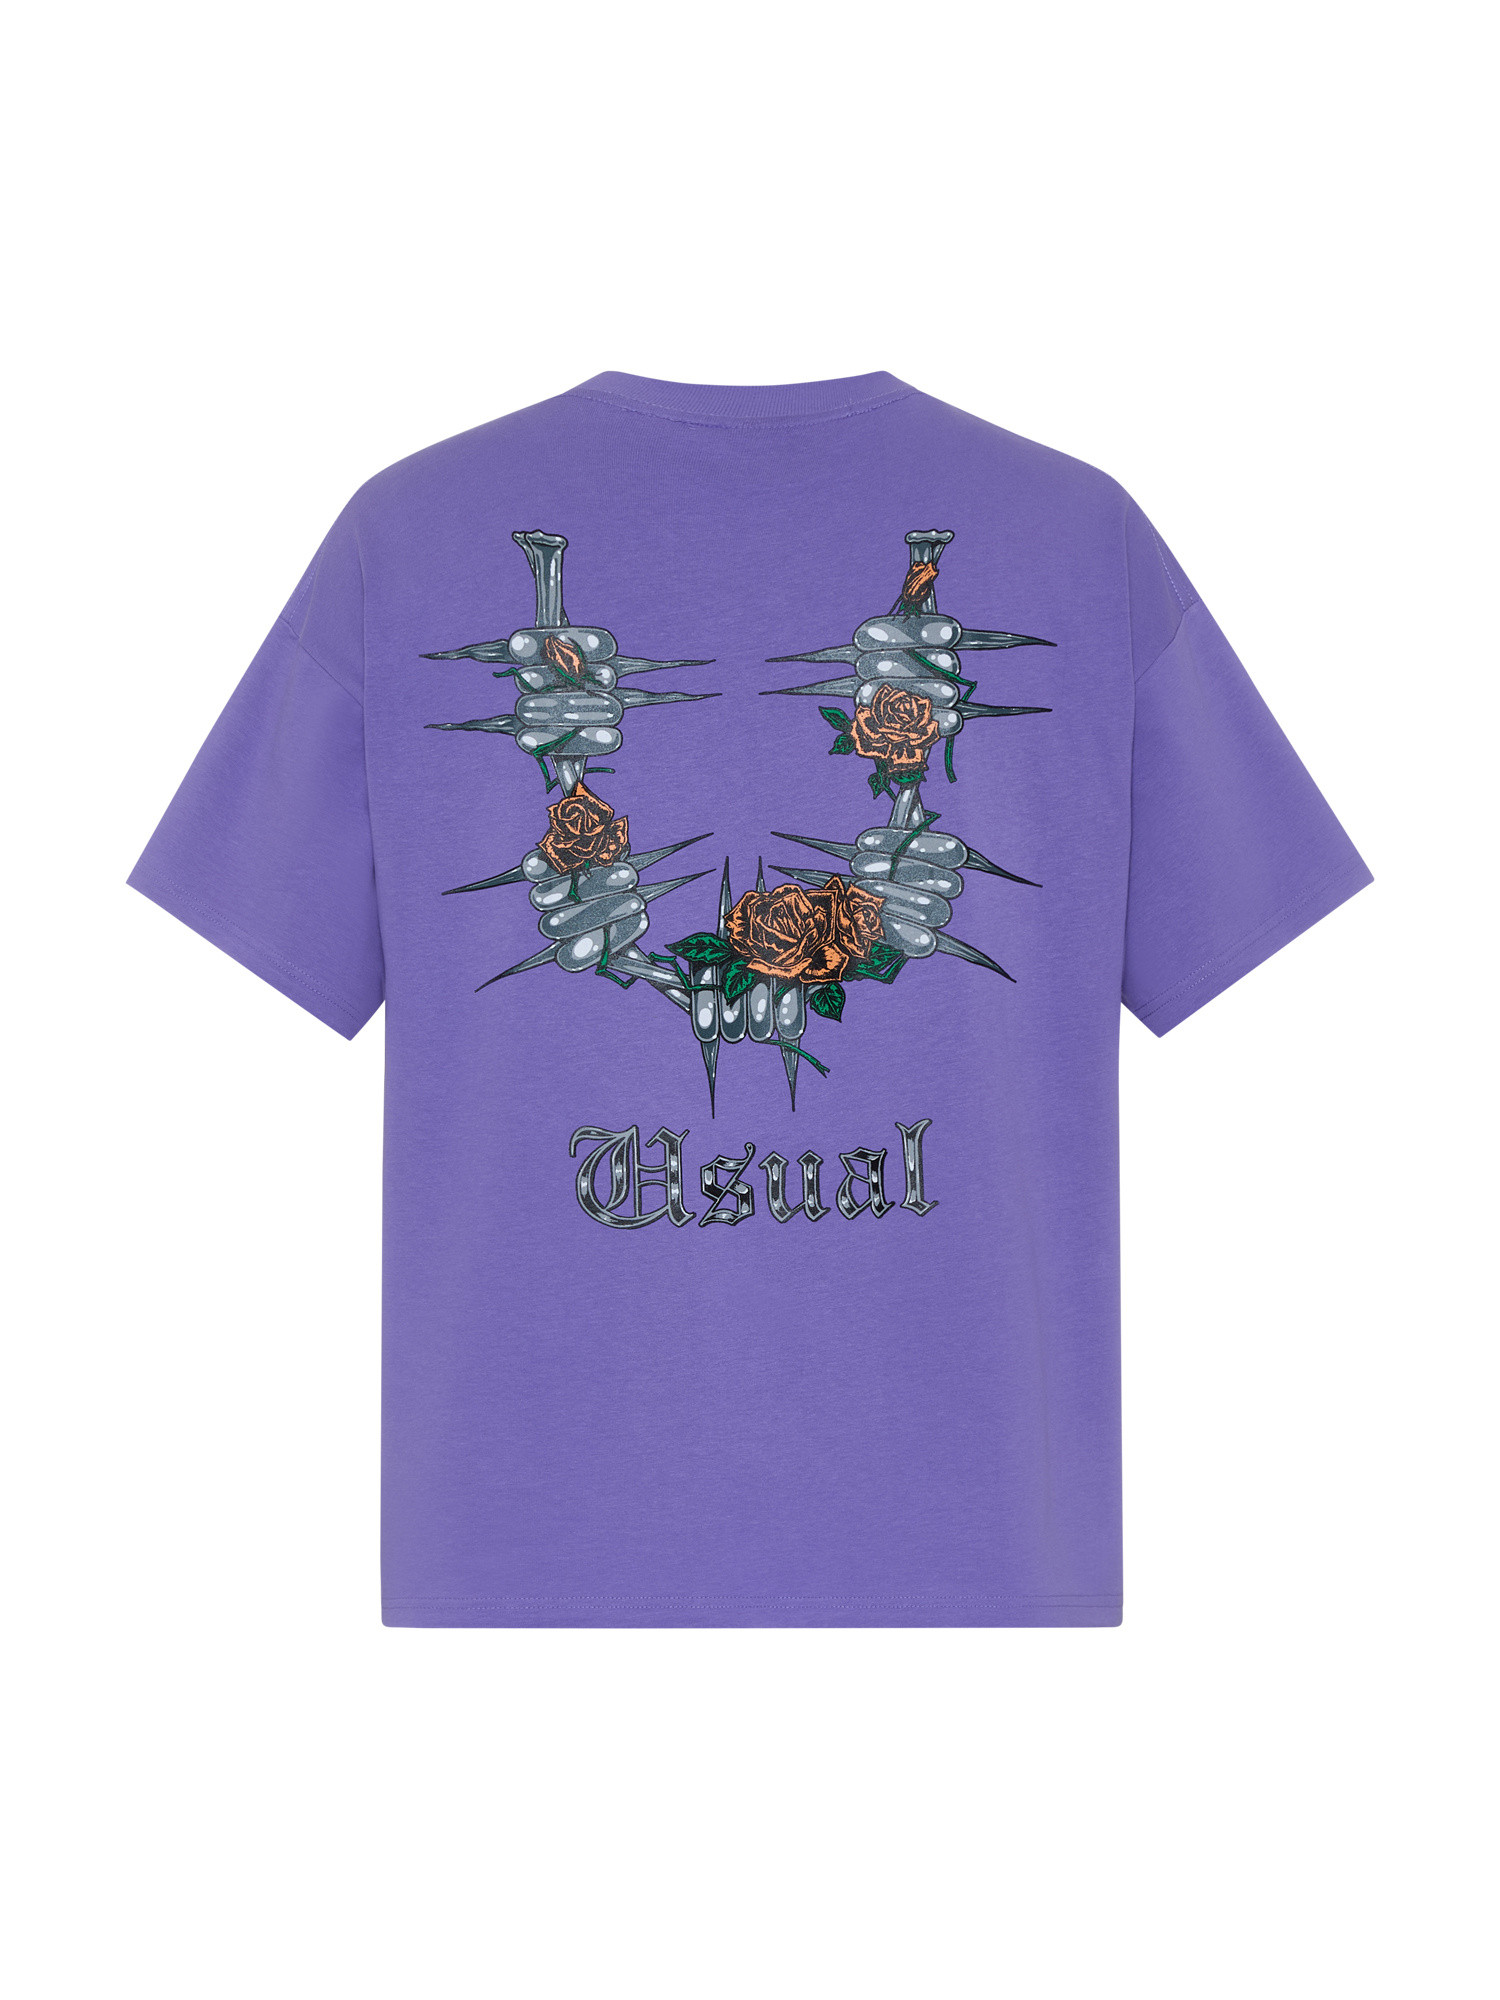 Usual - Barrio T-Shirt, Purple, large image number 1